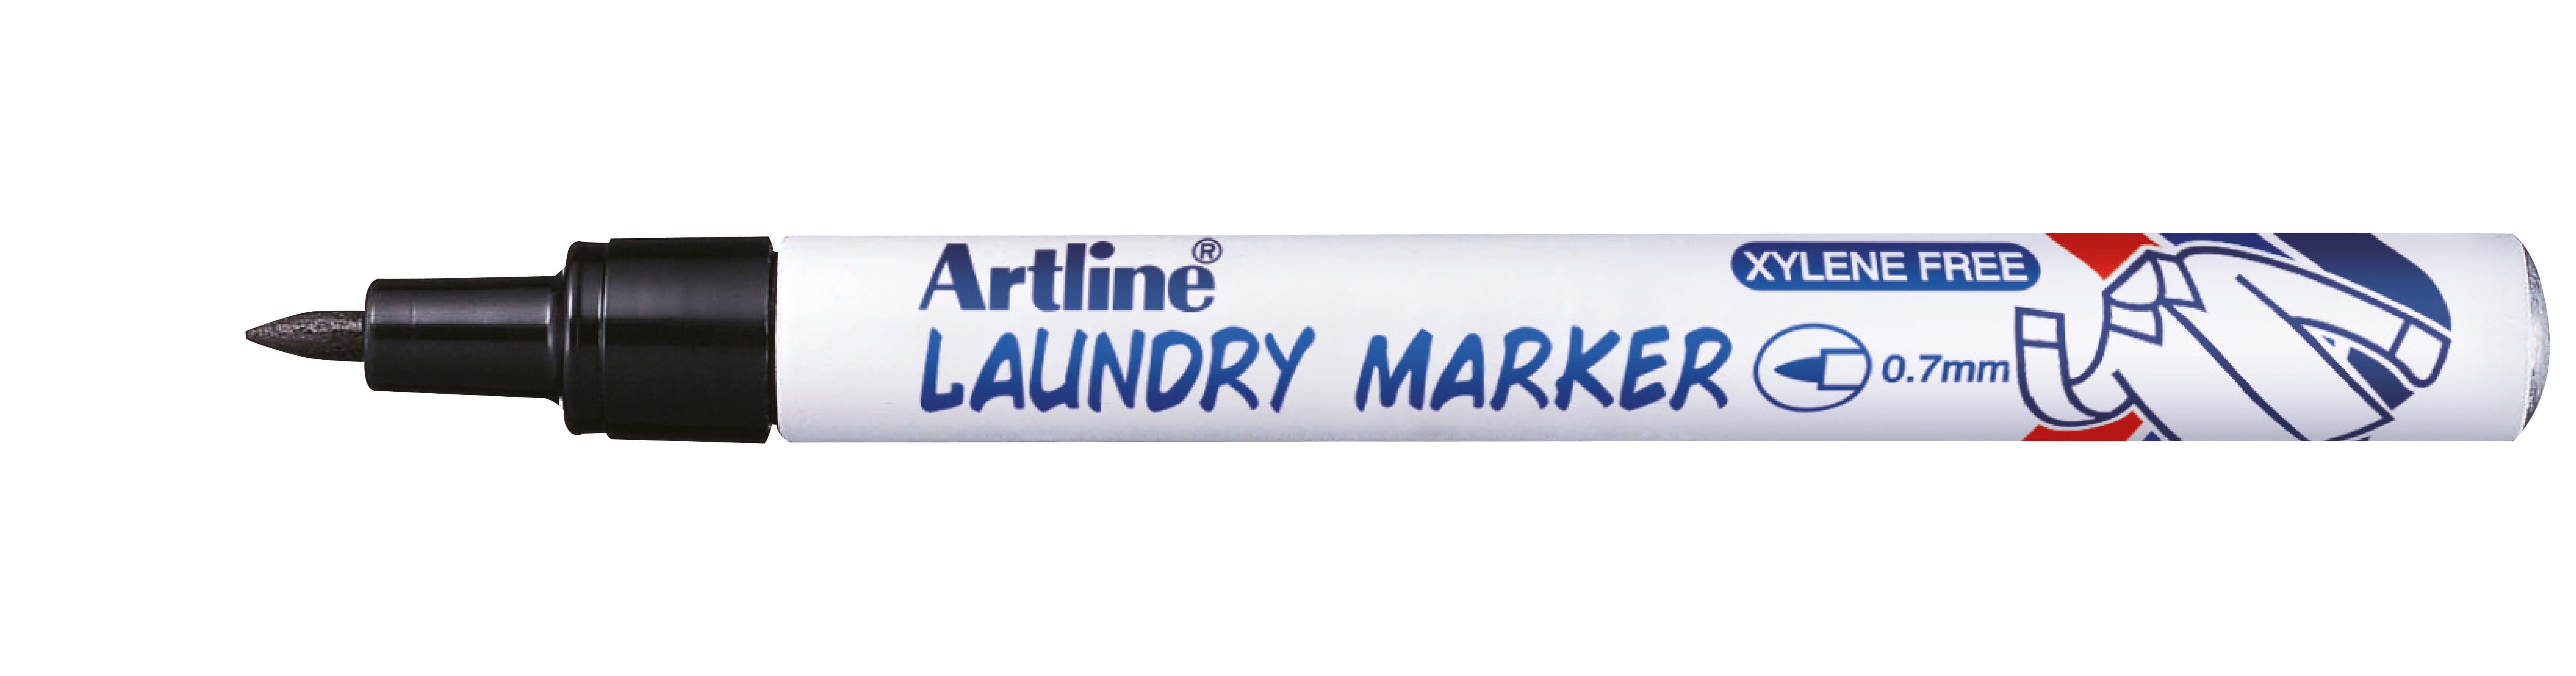 Laundry Marker - Buy Artline Products on Best Price in India